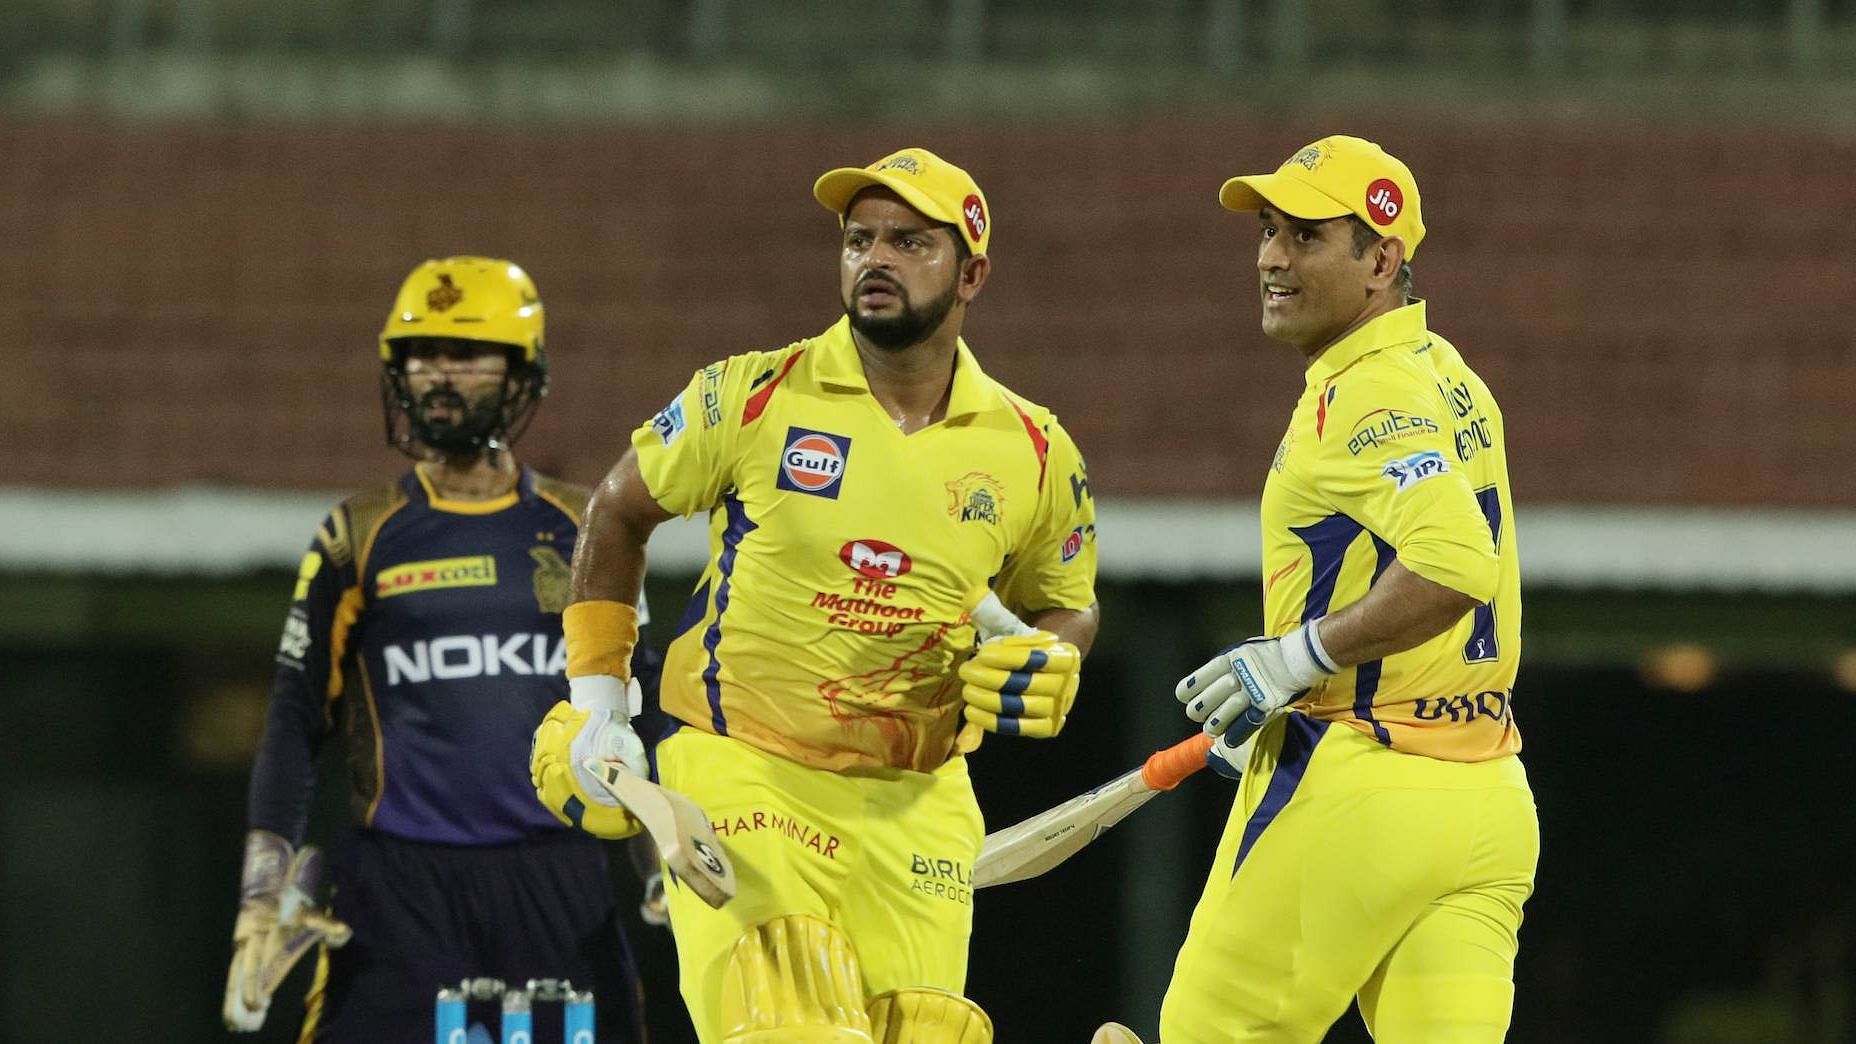 In the IPL, Suresh Raina and MS Dhoni both play for Chennai Super Kings, which is also led by the latter.